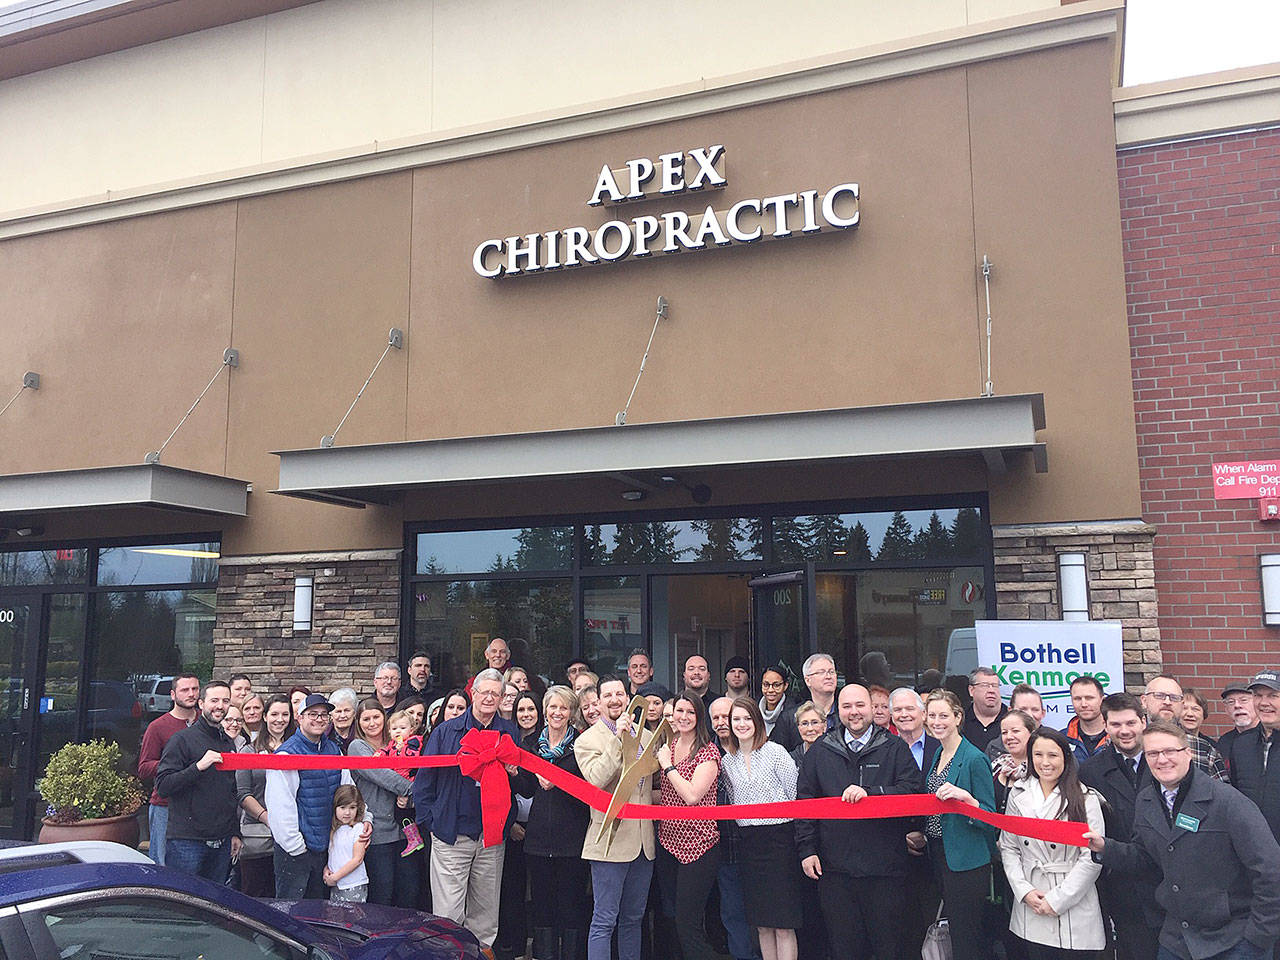 The Bothell-Kenmore Chamber of Commerce, along with the community gathered to celebrate the ribbon cutting ceremony for Apex Chiropractic on Jan 10. Photo courtesy of Apex Chiropractic